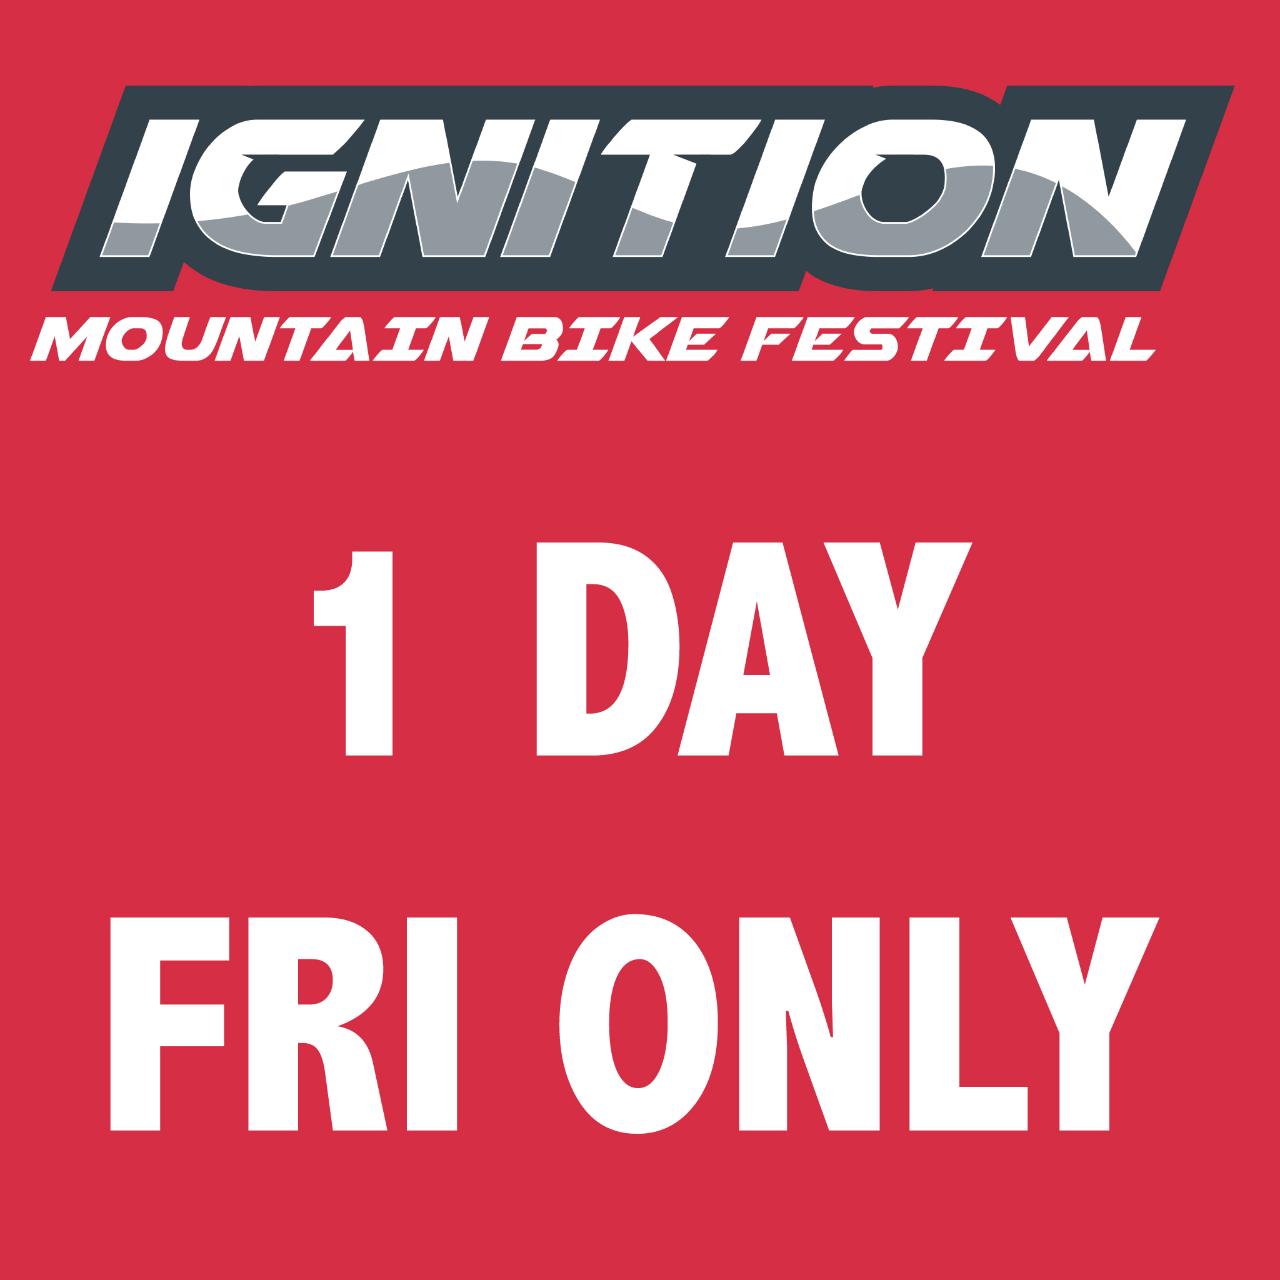 Ignition MTB Festival - 1 DAY FRIDAY ONLY